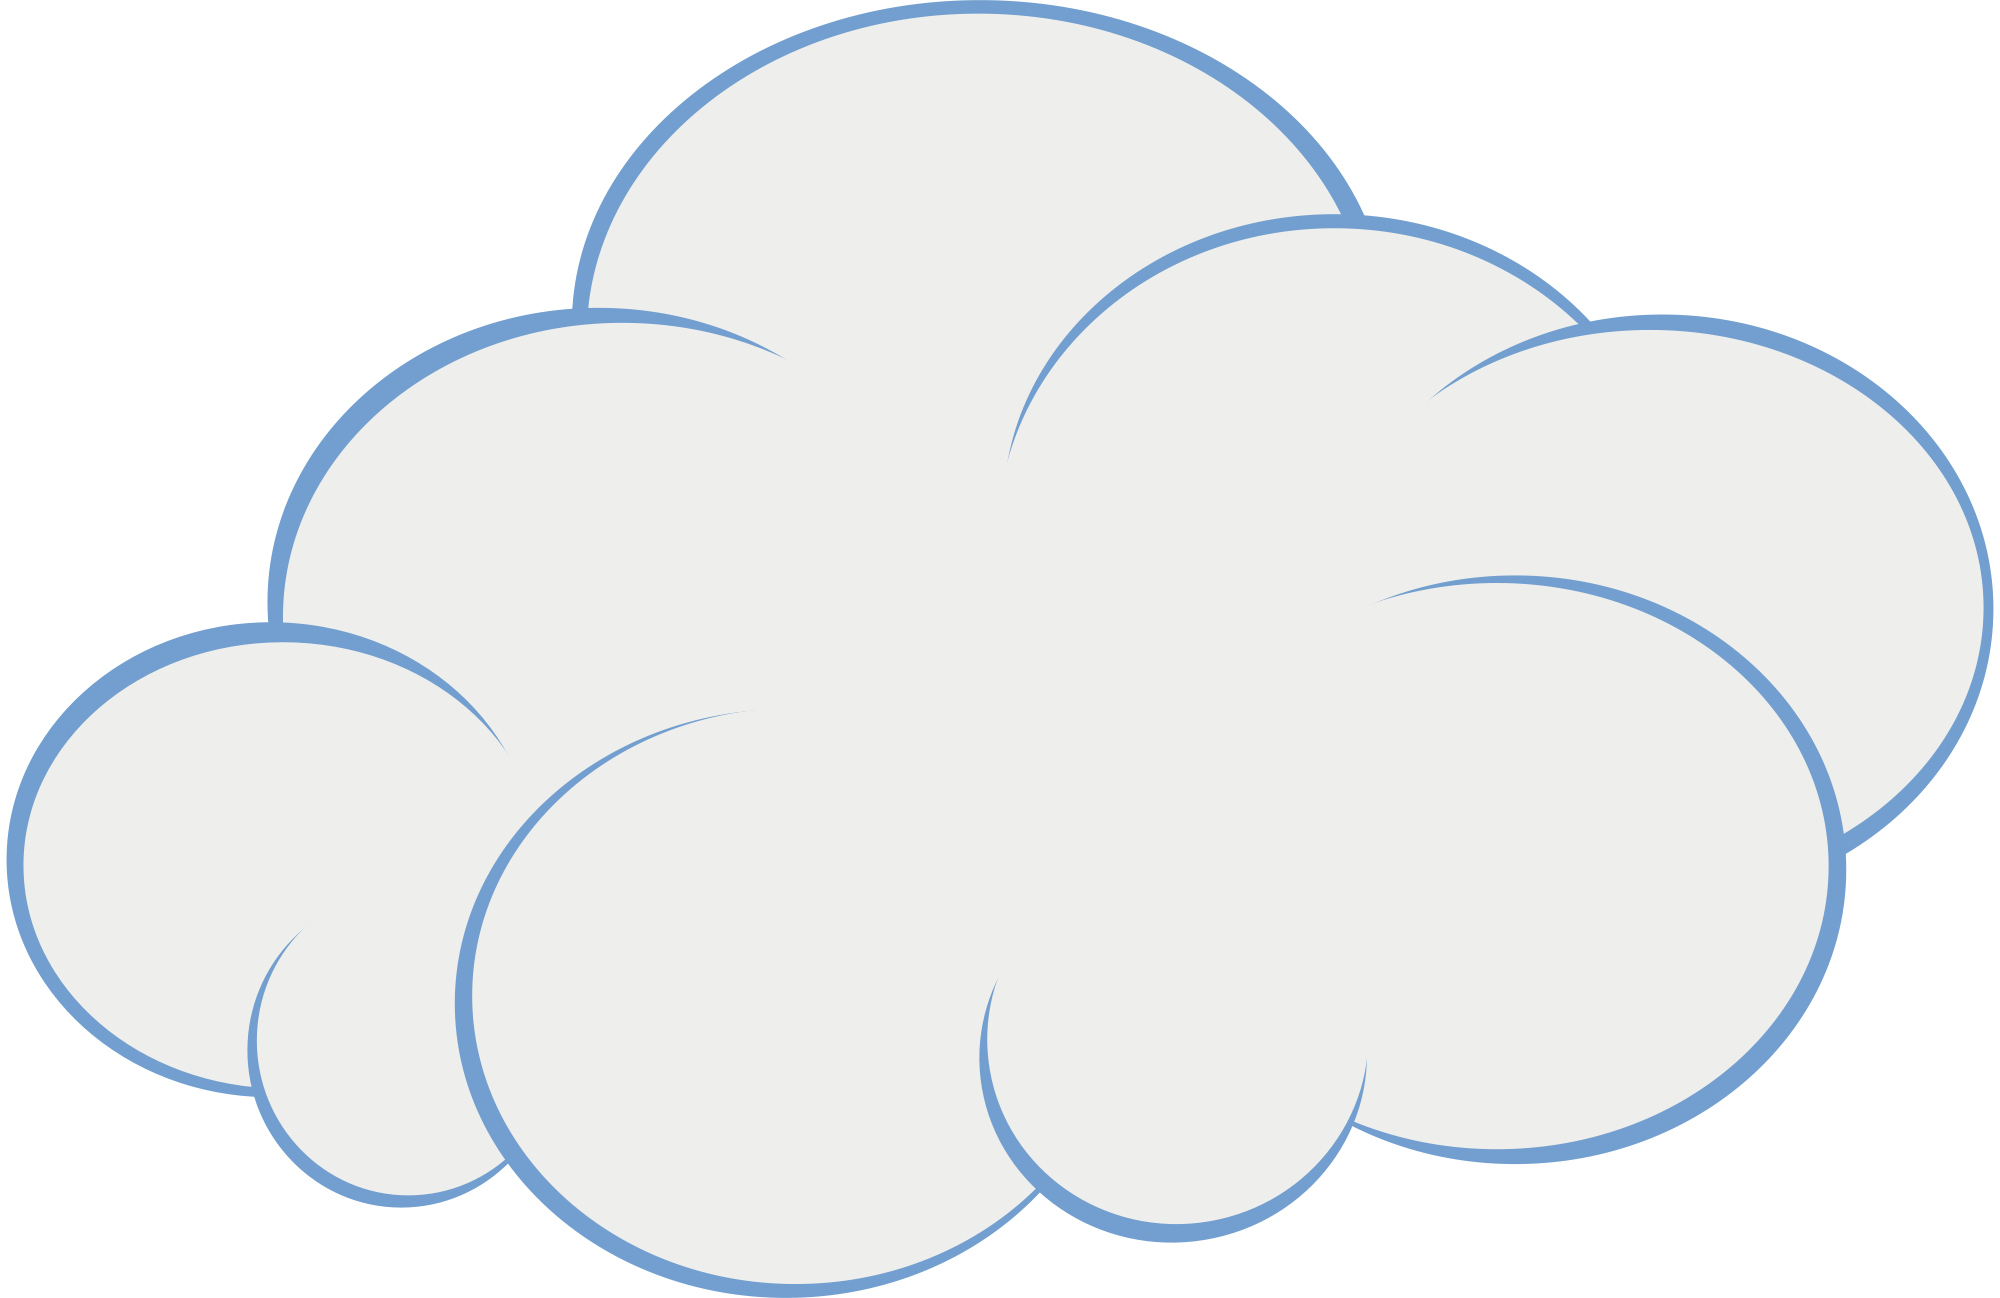 cloud clipart from the Clipart Library